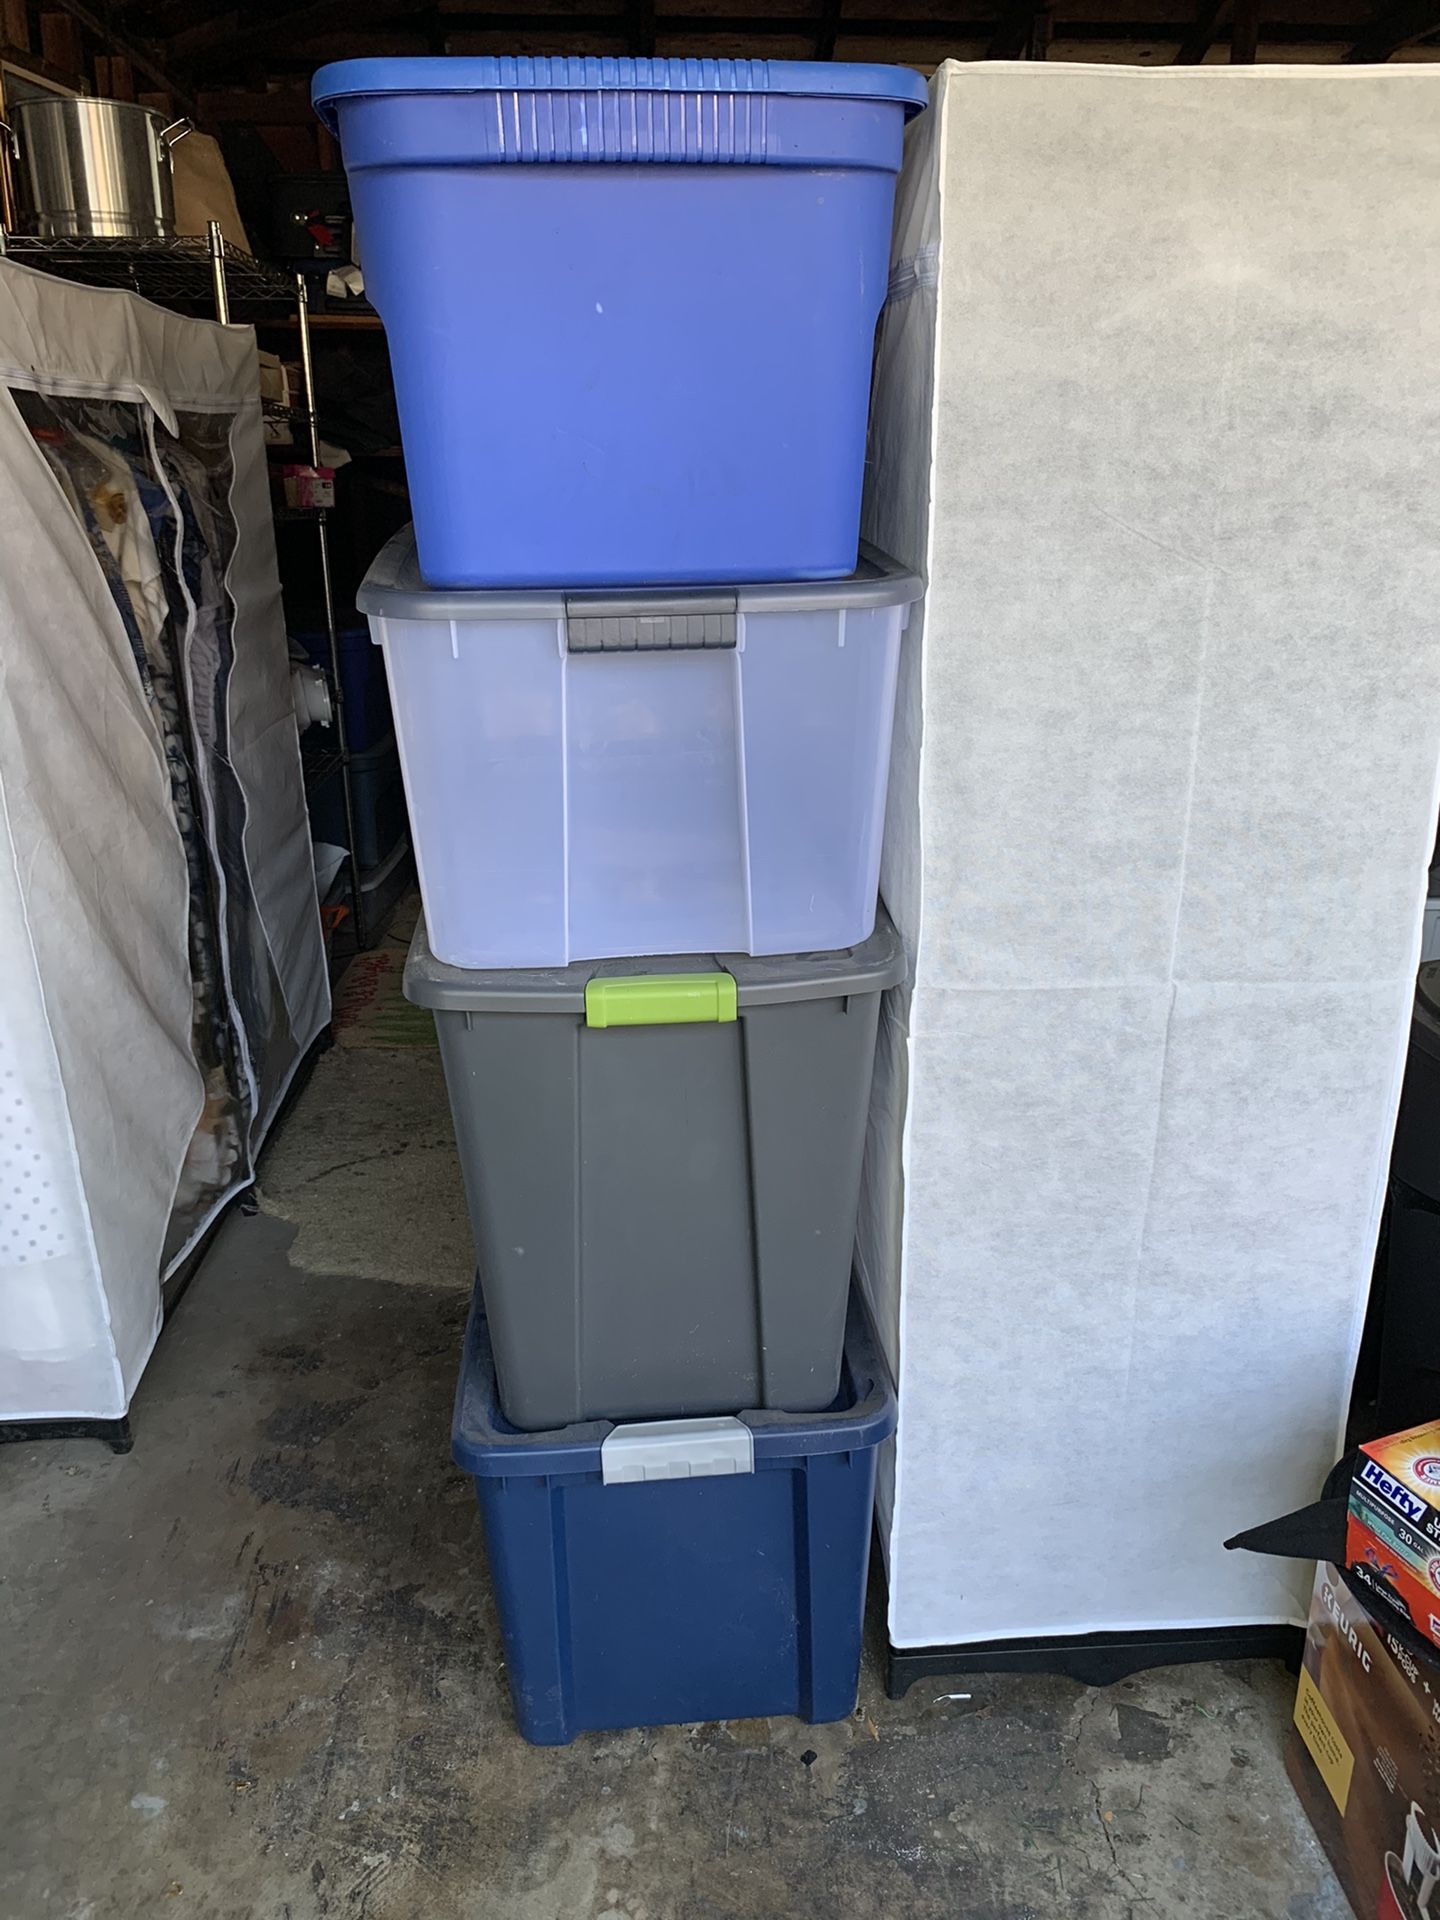 4 free empty storage containers